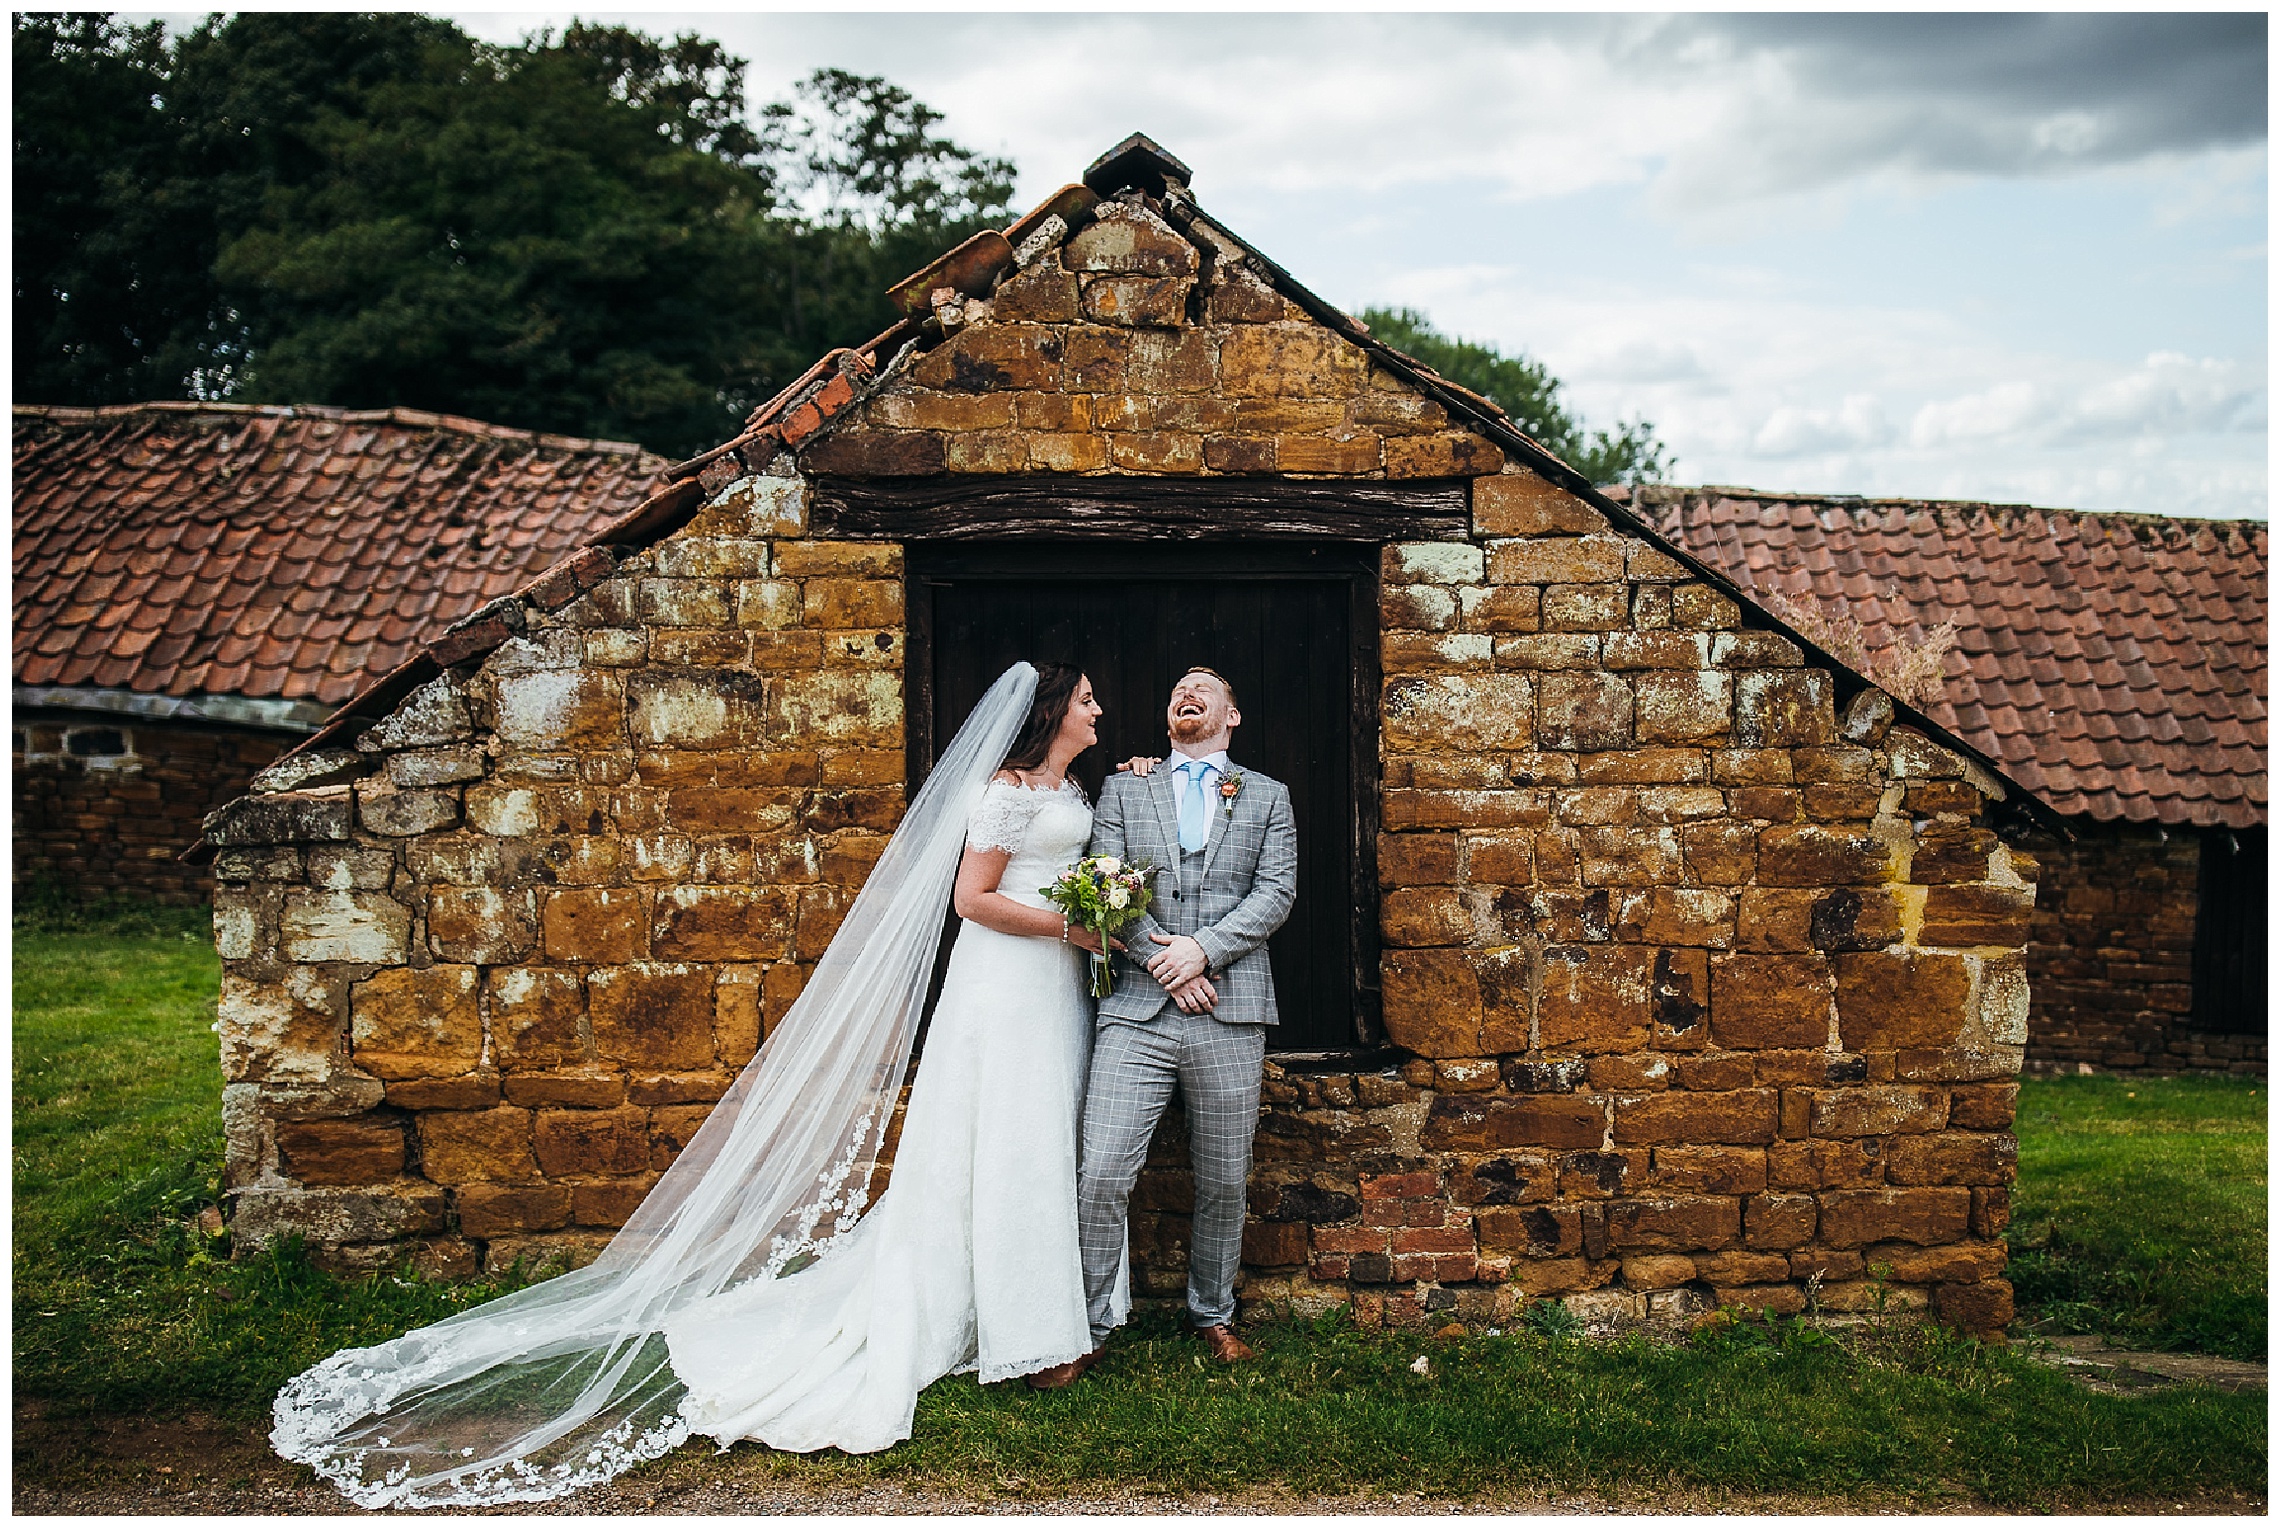 Bride and groom laughing in front of brick shed structure at hunsbury hill wedding venue